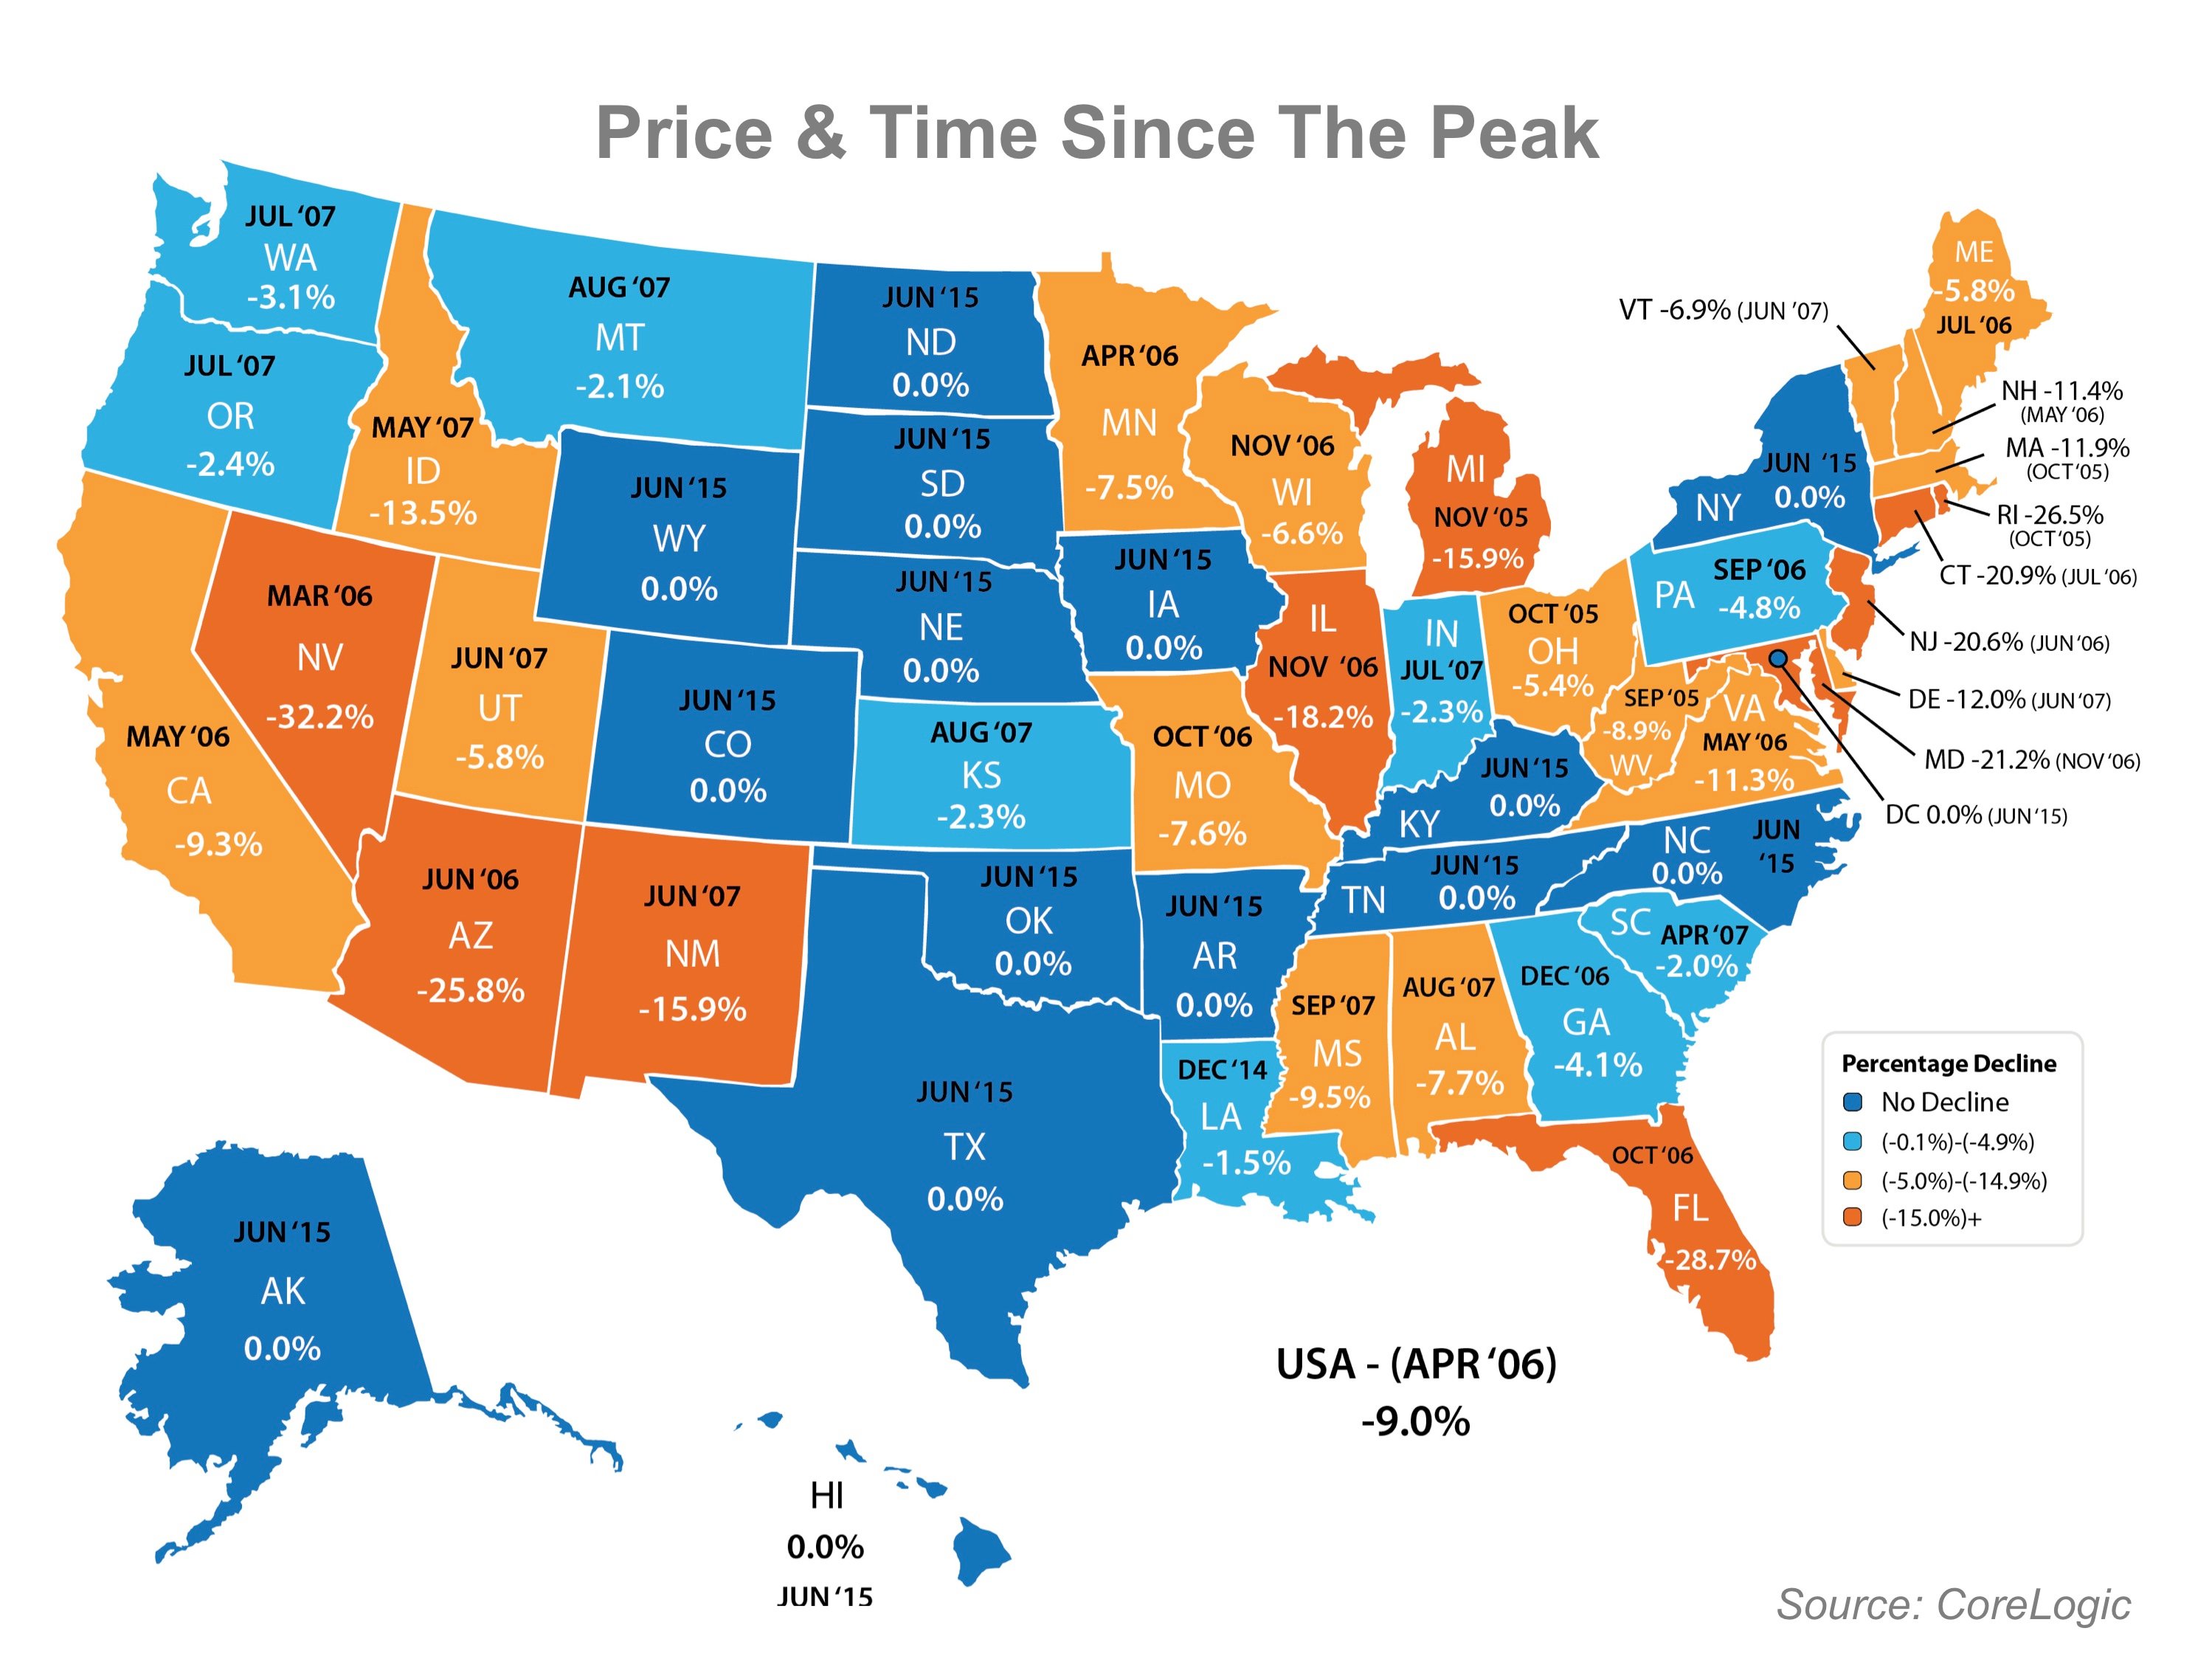 Price & Time Since The Peak Map Updated